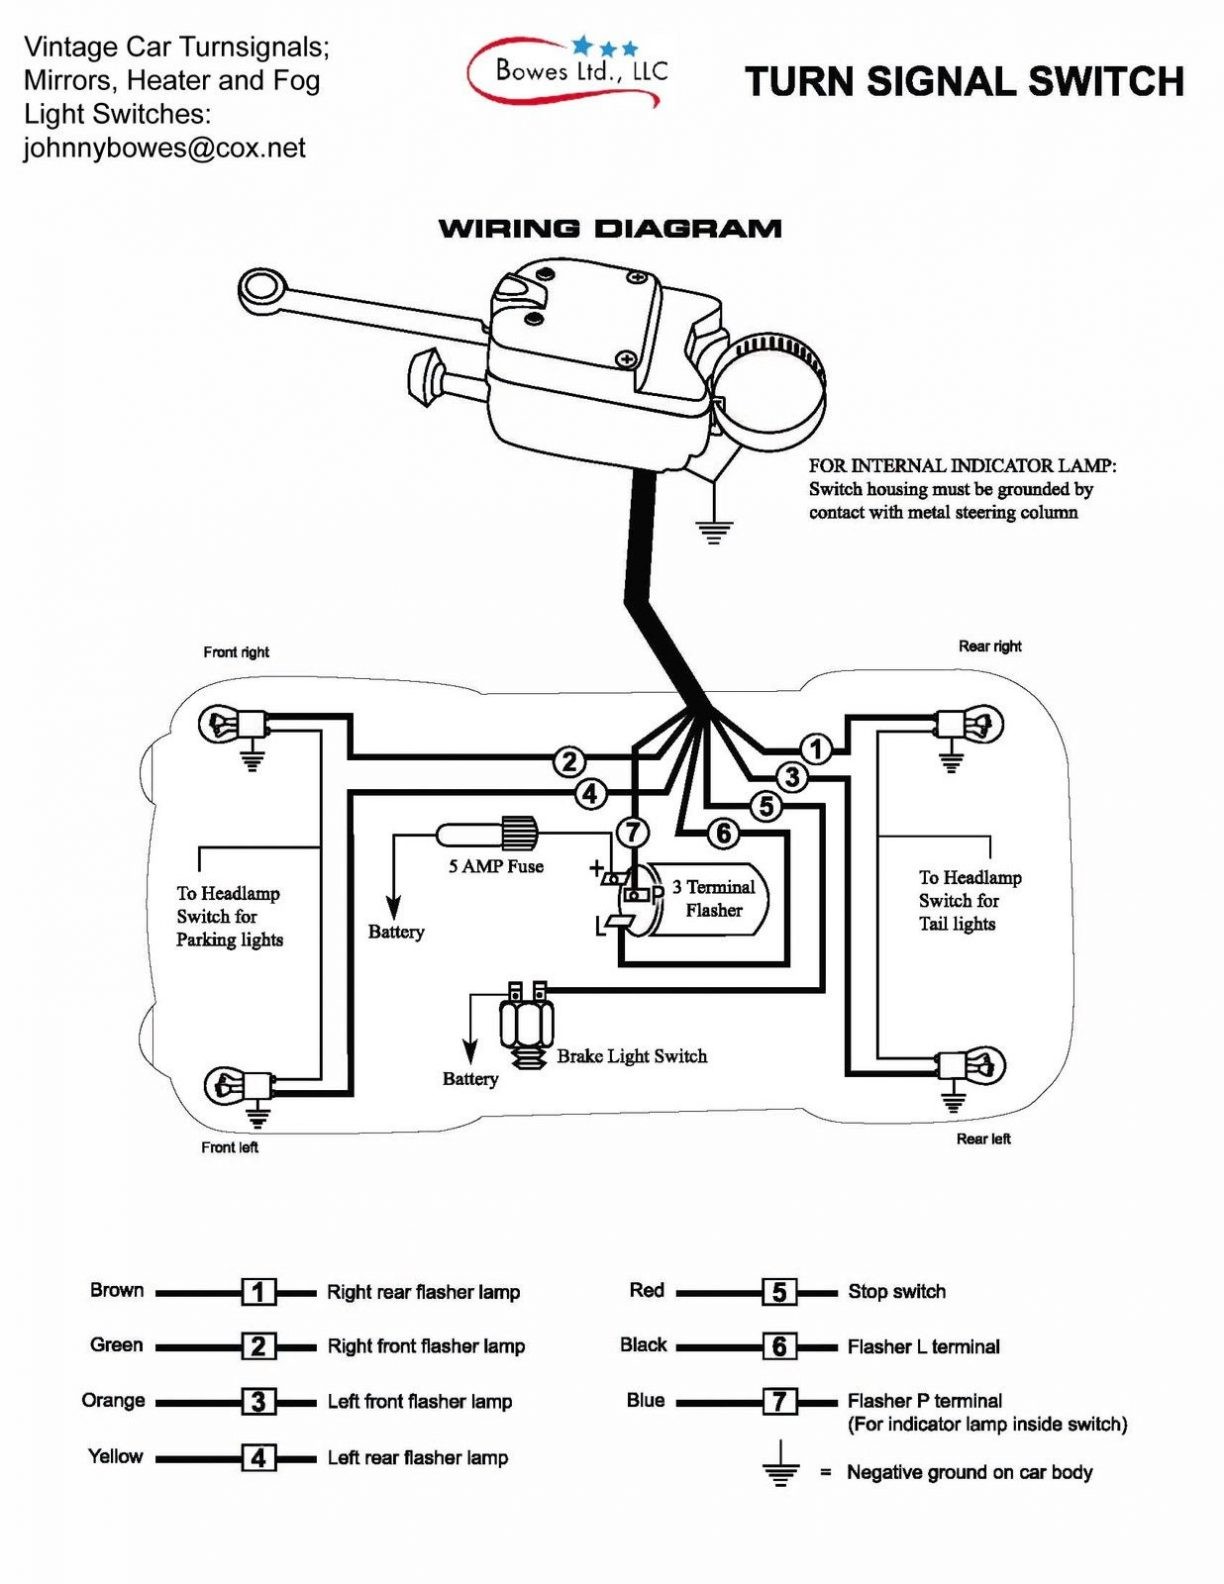 Grote Universal Turn Signal Switch Wiring Diagram Example